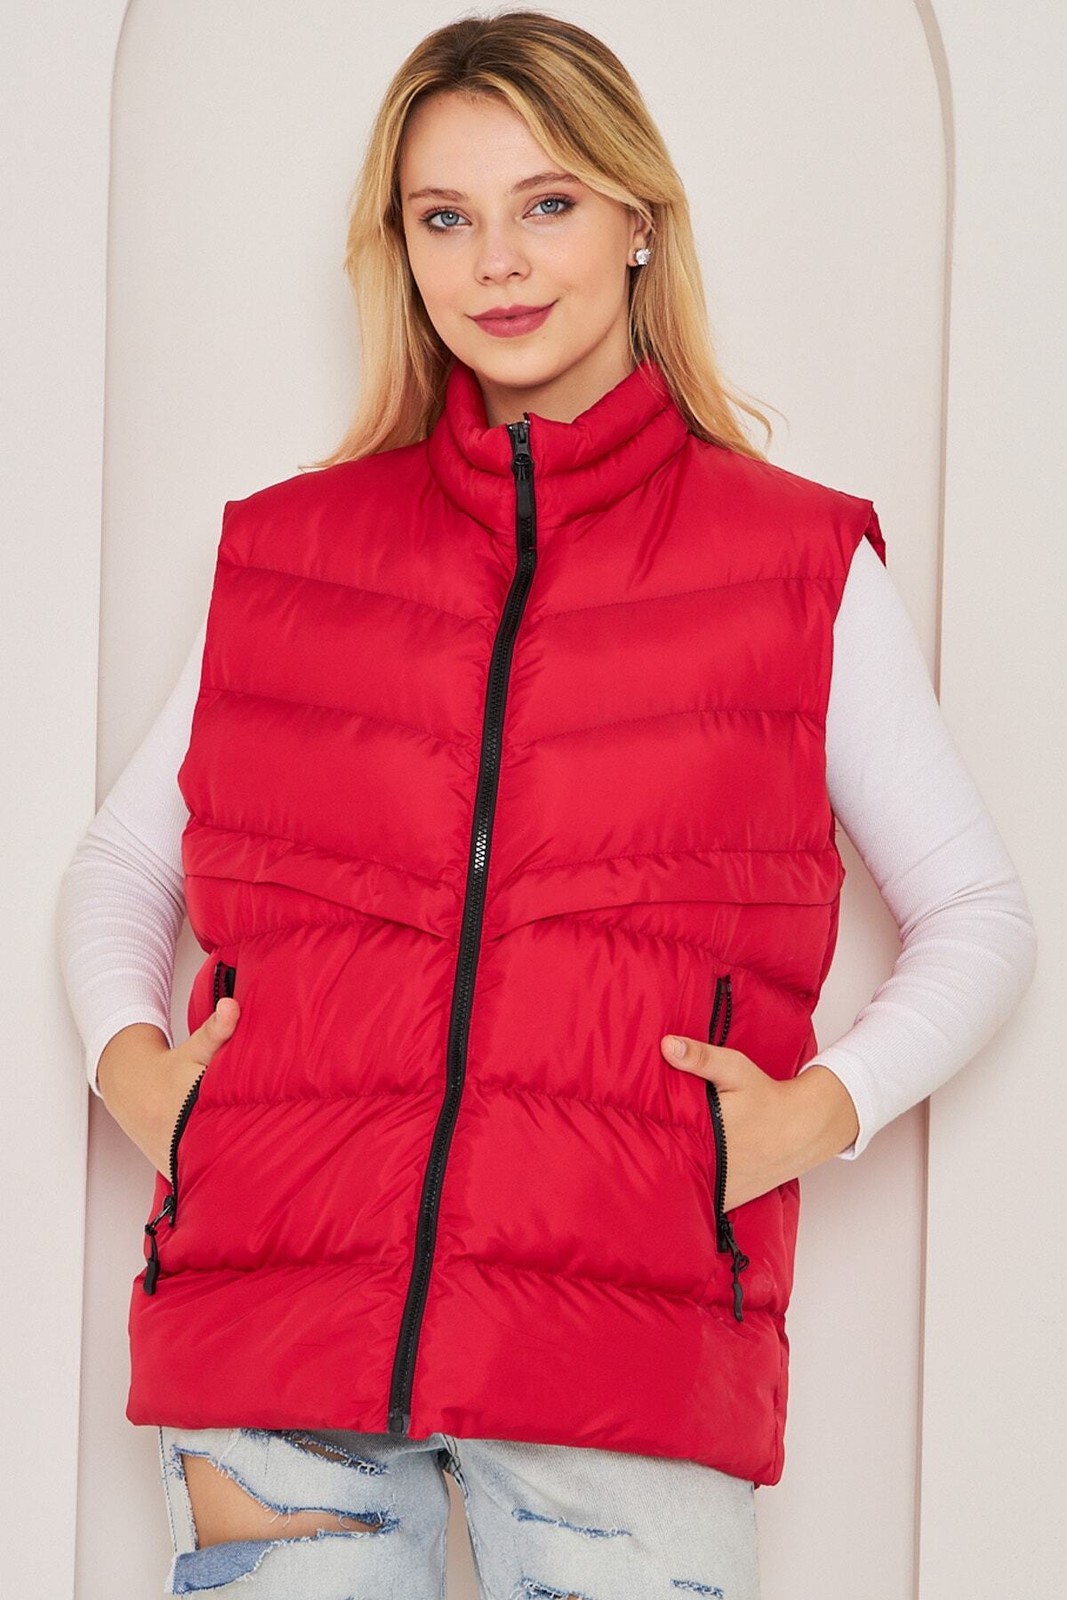 River Club Women's Lined Water And Windproof Red Puffer Vest